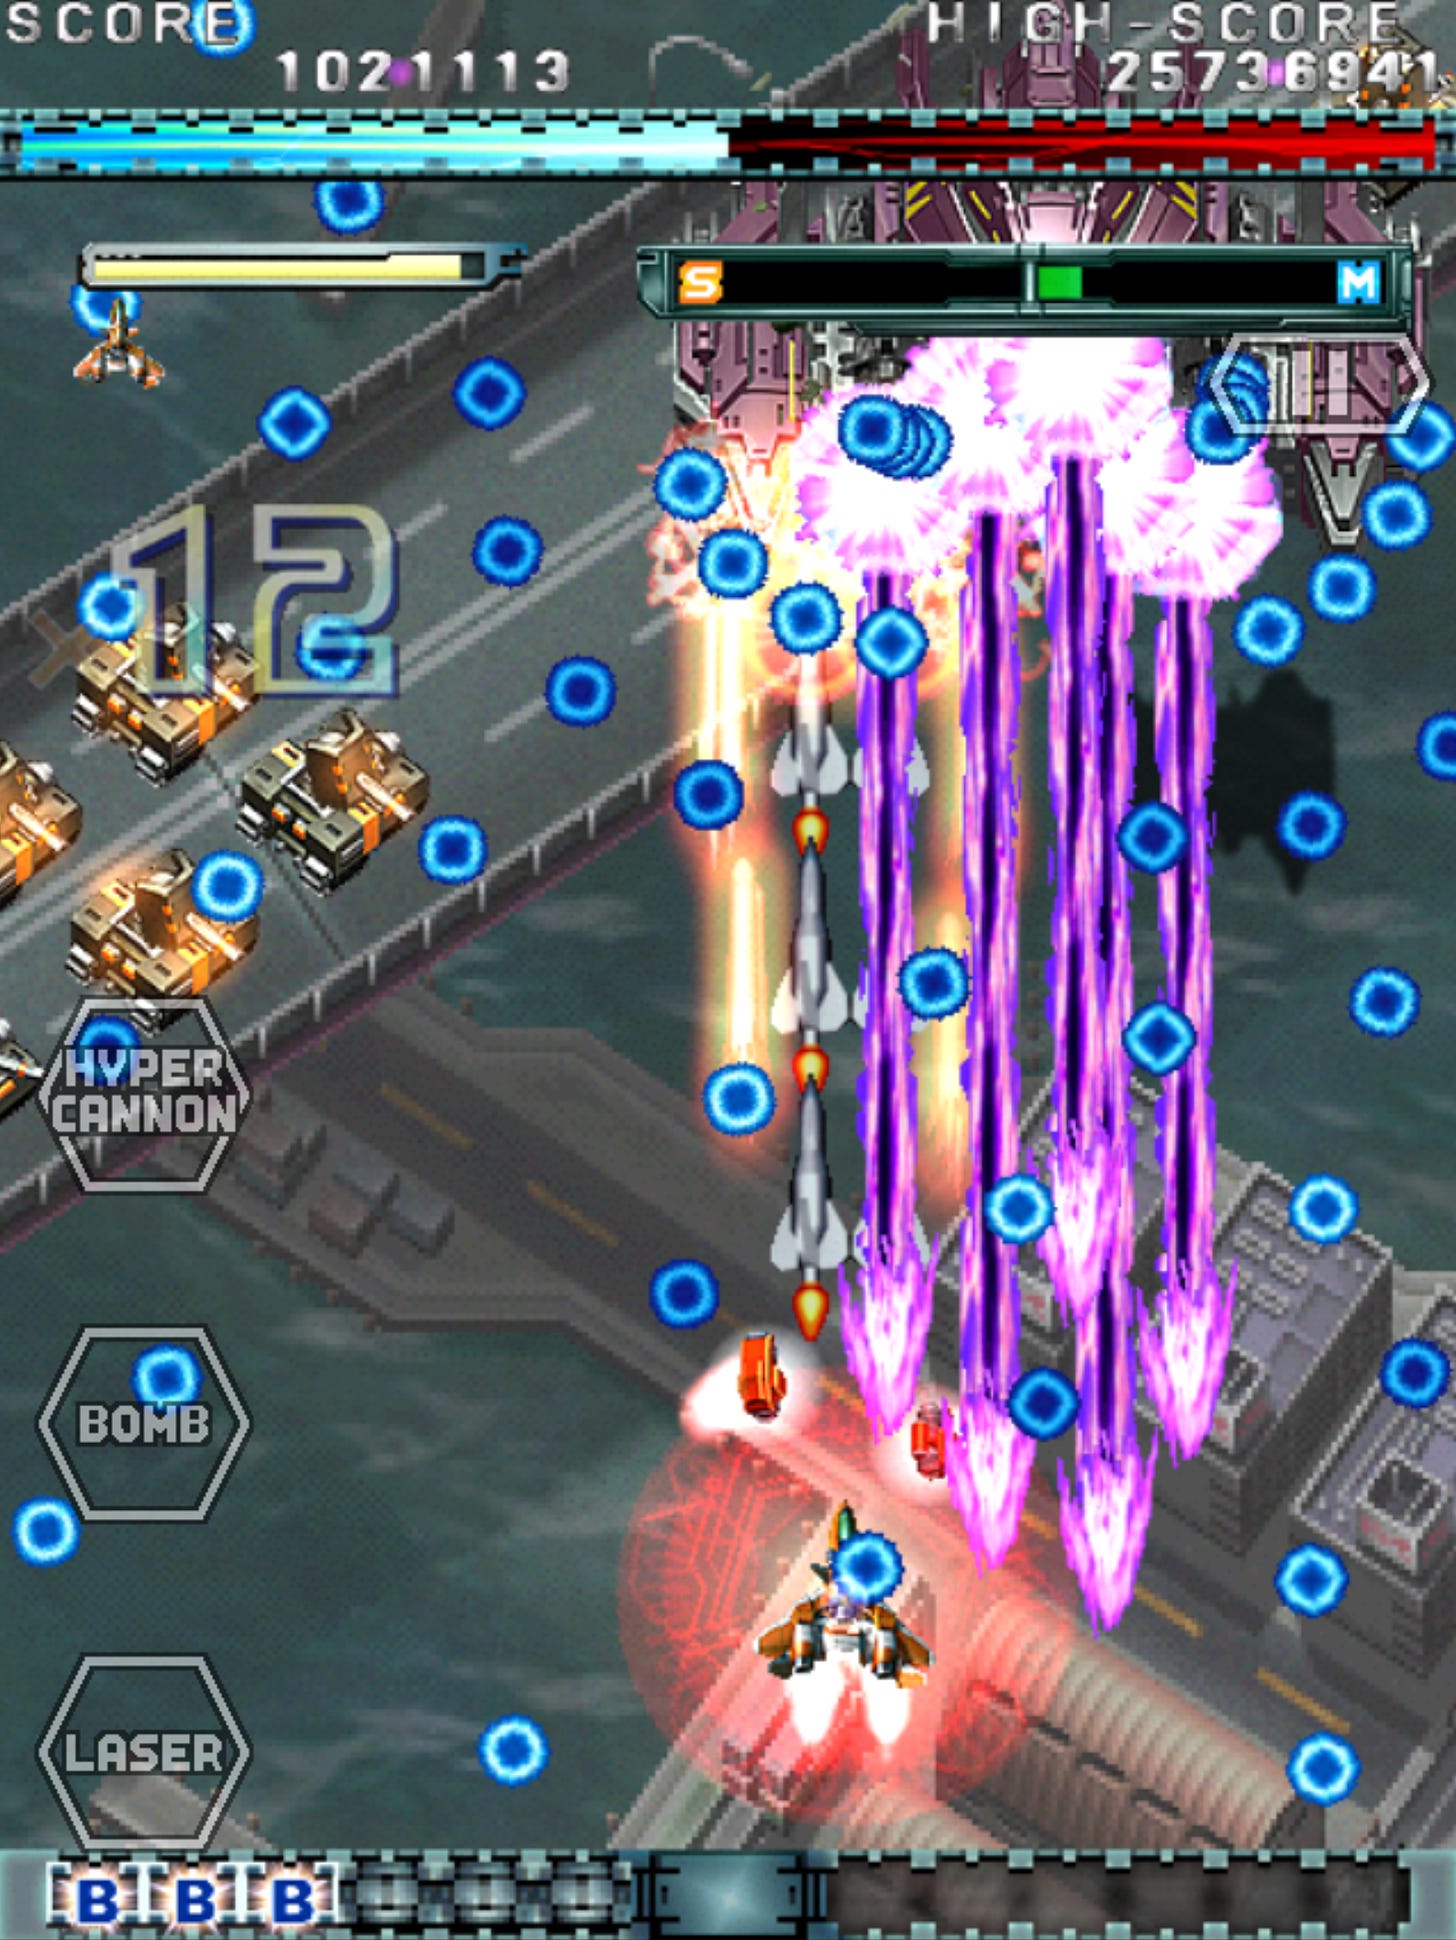 A scattering of blue bullets fills the screen, with tanks to the left